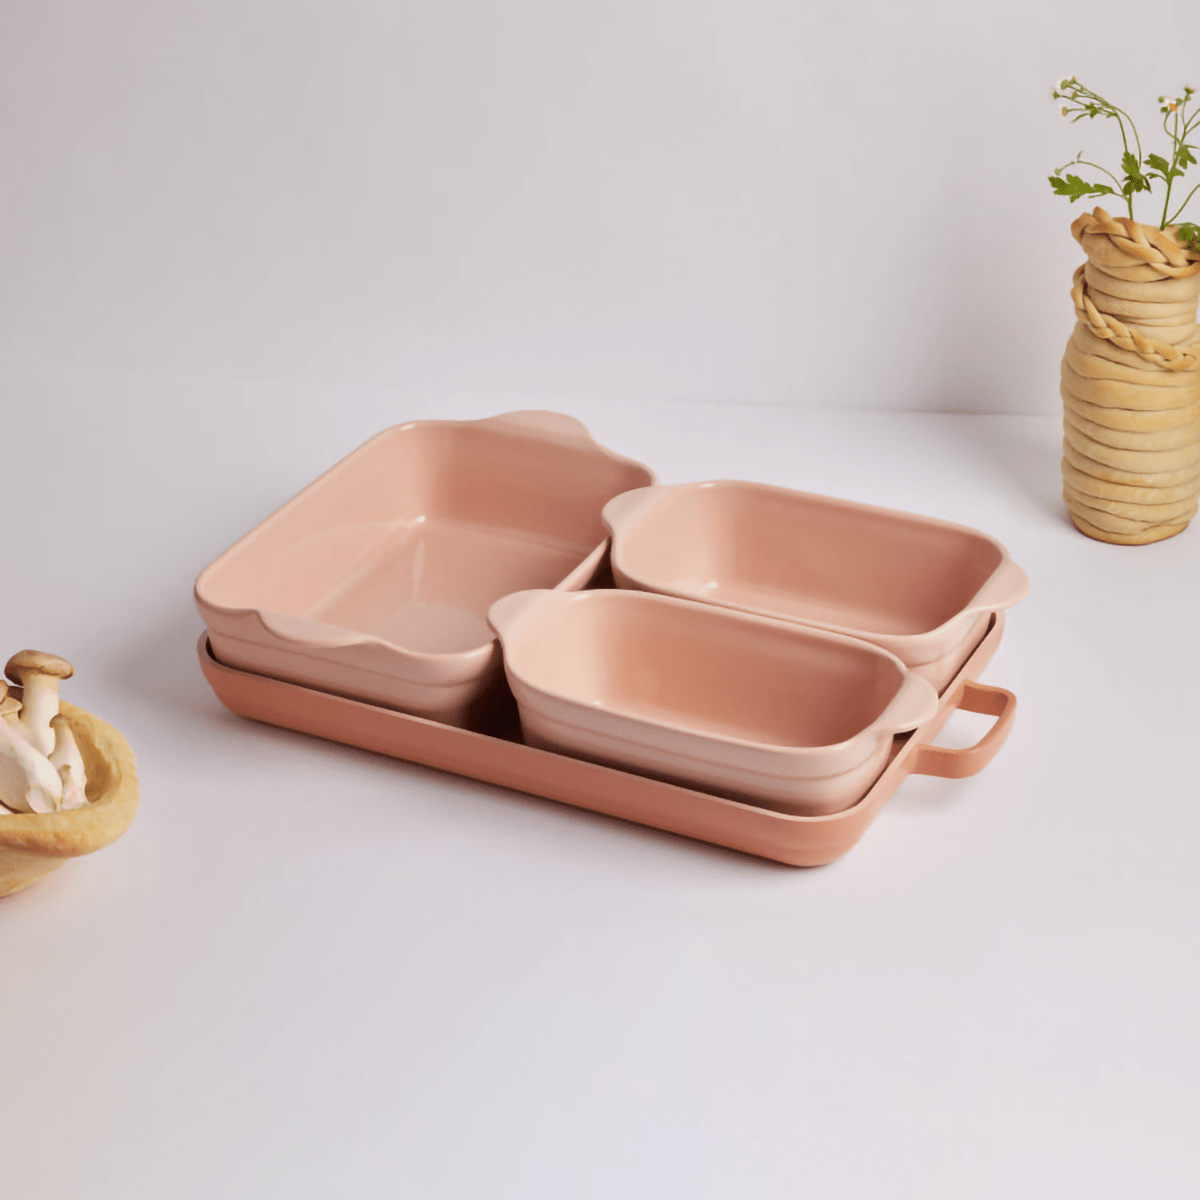 https://www.tasteofhome.com/wp-content/uploads/2023/04/our-place-ovenware-set-via-fromourplace.com-ecomm.png?fit=700%2C700